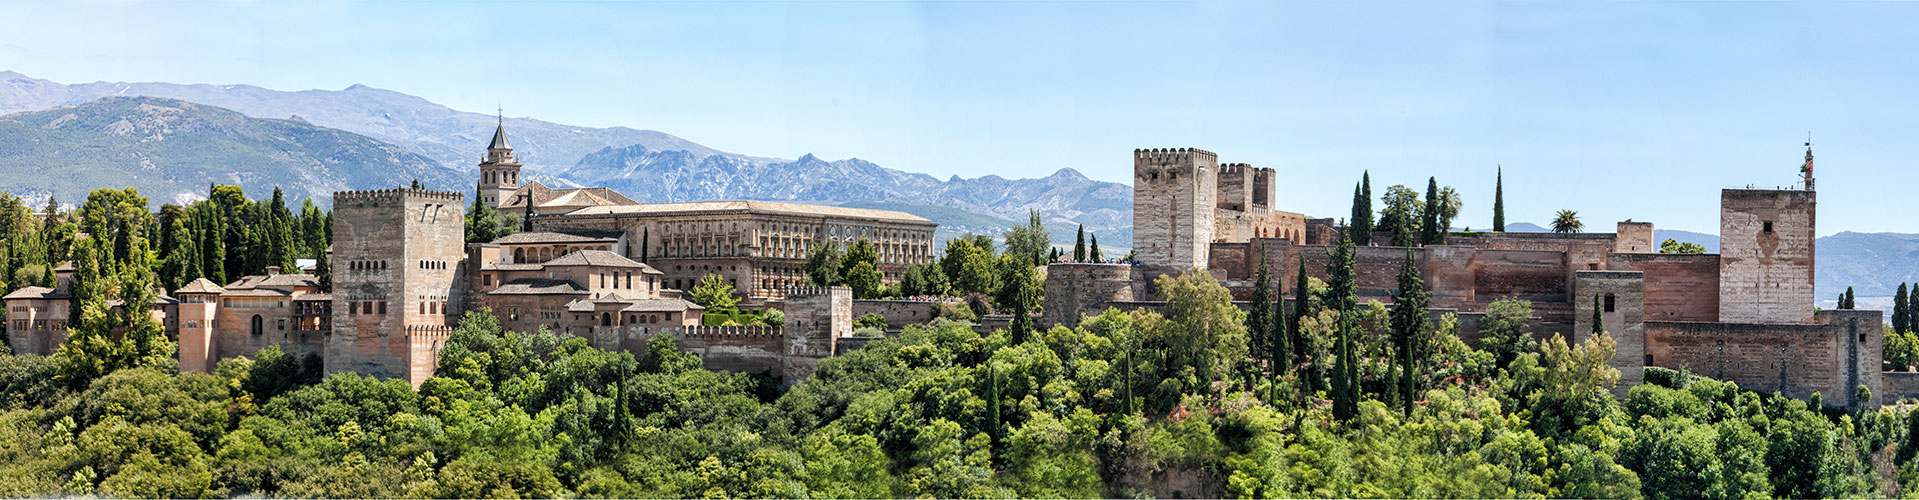 The Alhambra palace and fortress in Granada, Spain.